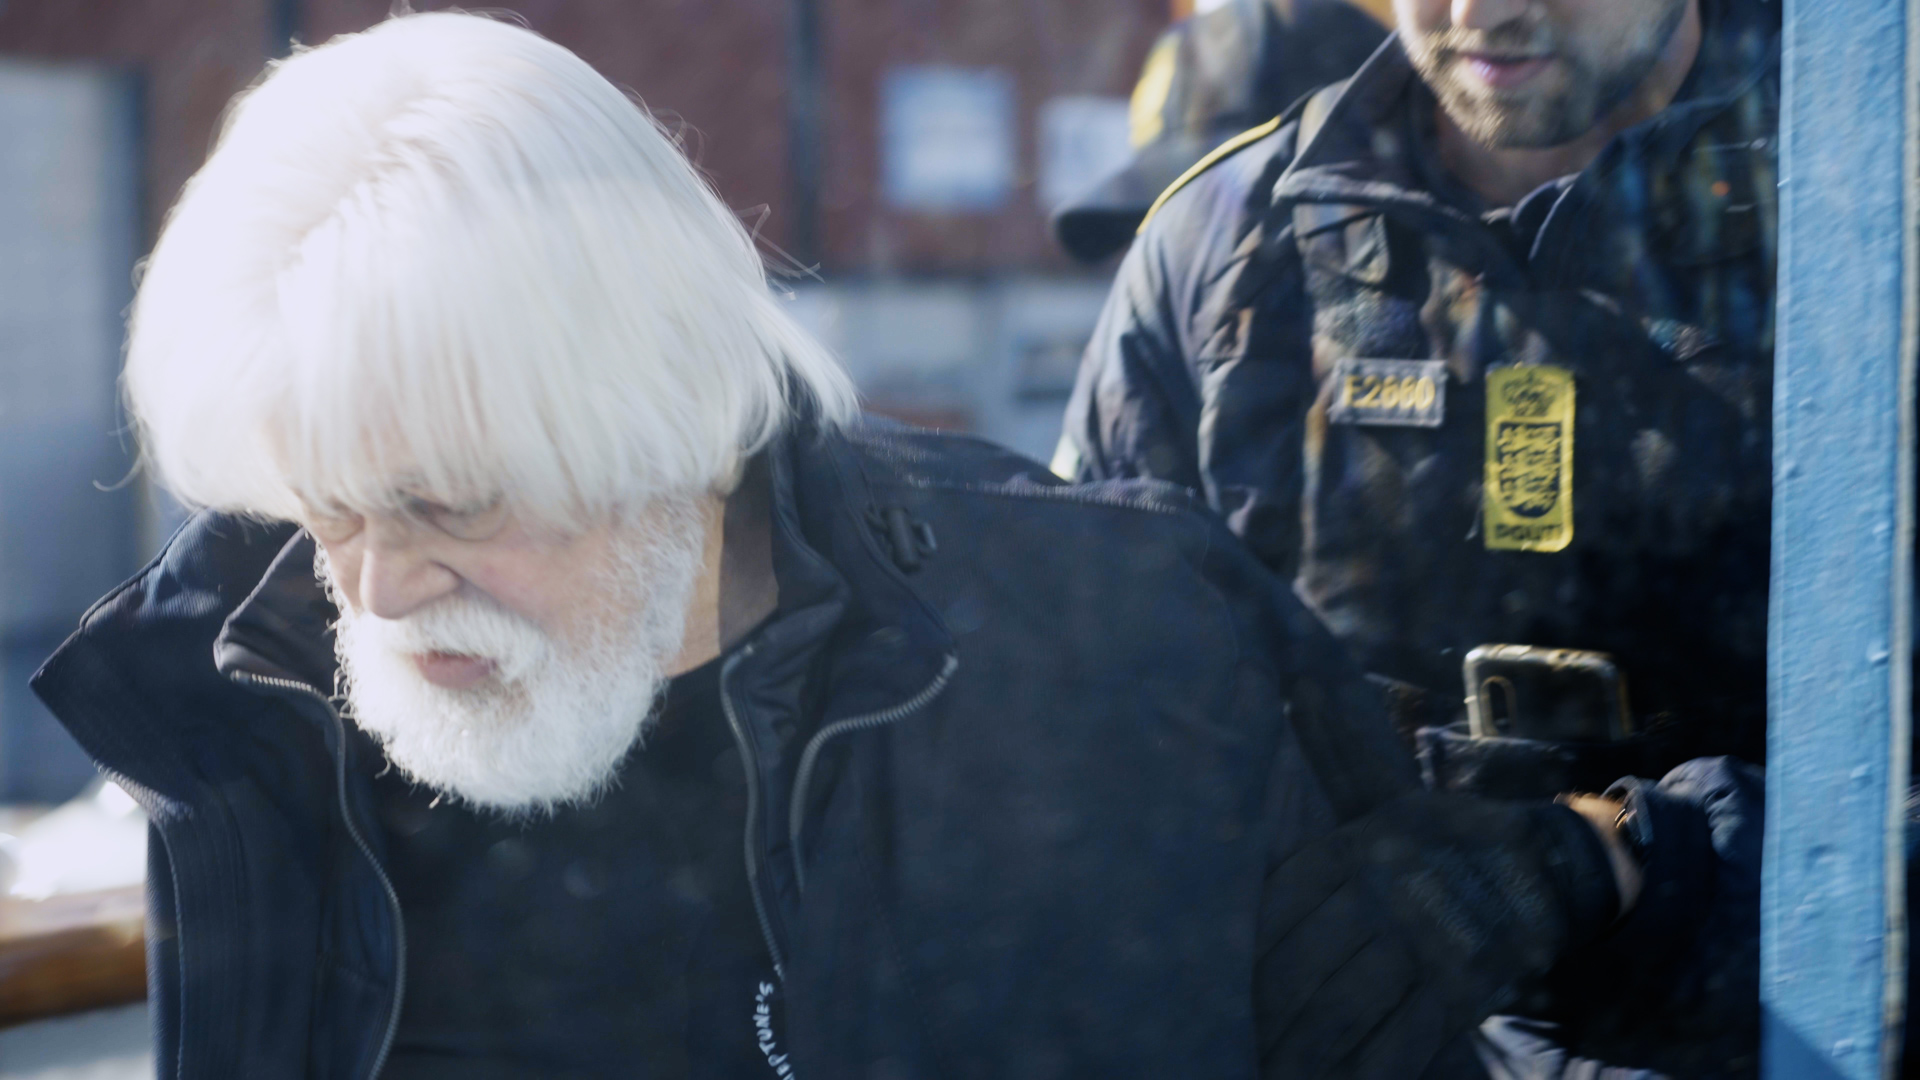 Anti-whaling activist and Greenpeace co-founder Paul Watson arrested in Greenland